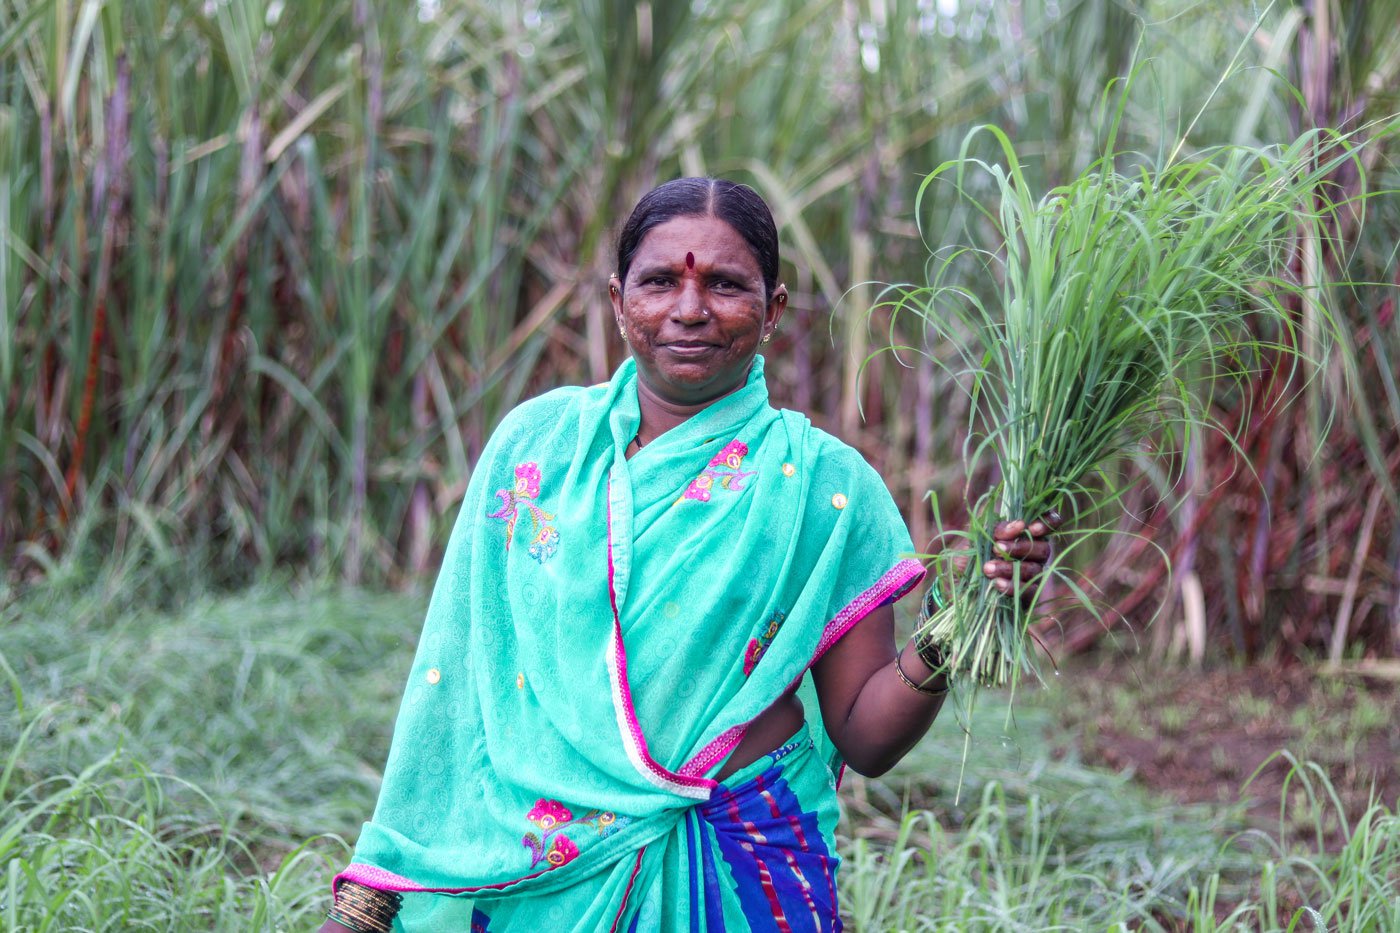 Bharti Kamble says there is less work coming her way as heavy rains and floods destroy crops , making it financially unviable for farmers to hire labour